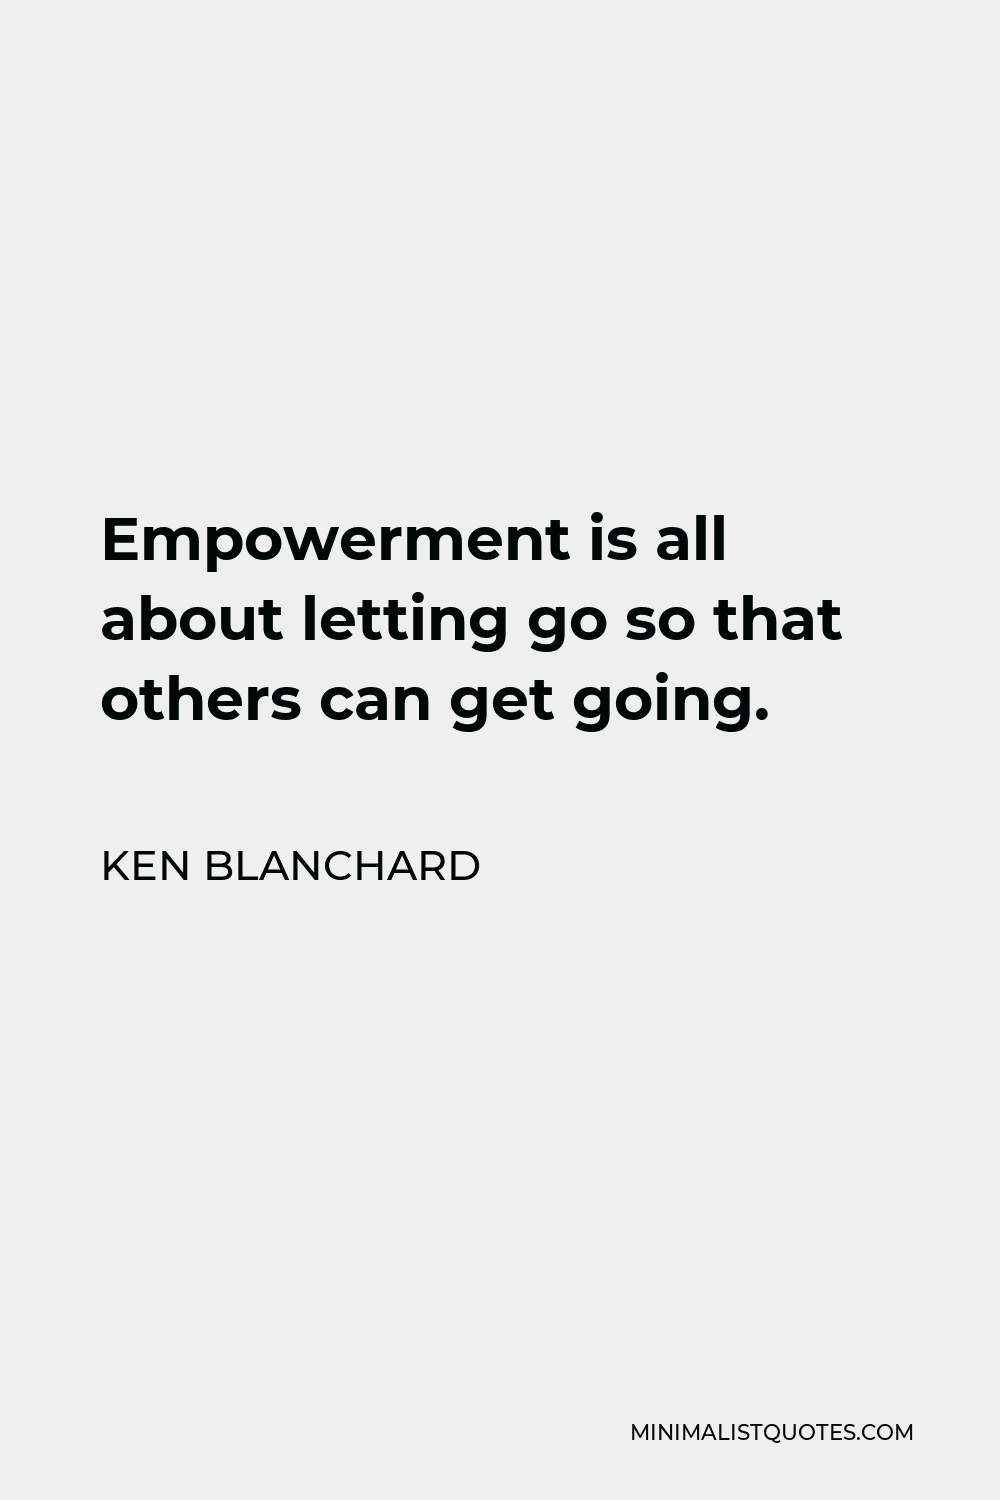 Ken Blanchard Quote - Empowerment is all about letting go so that others can get going.